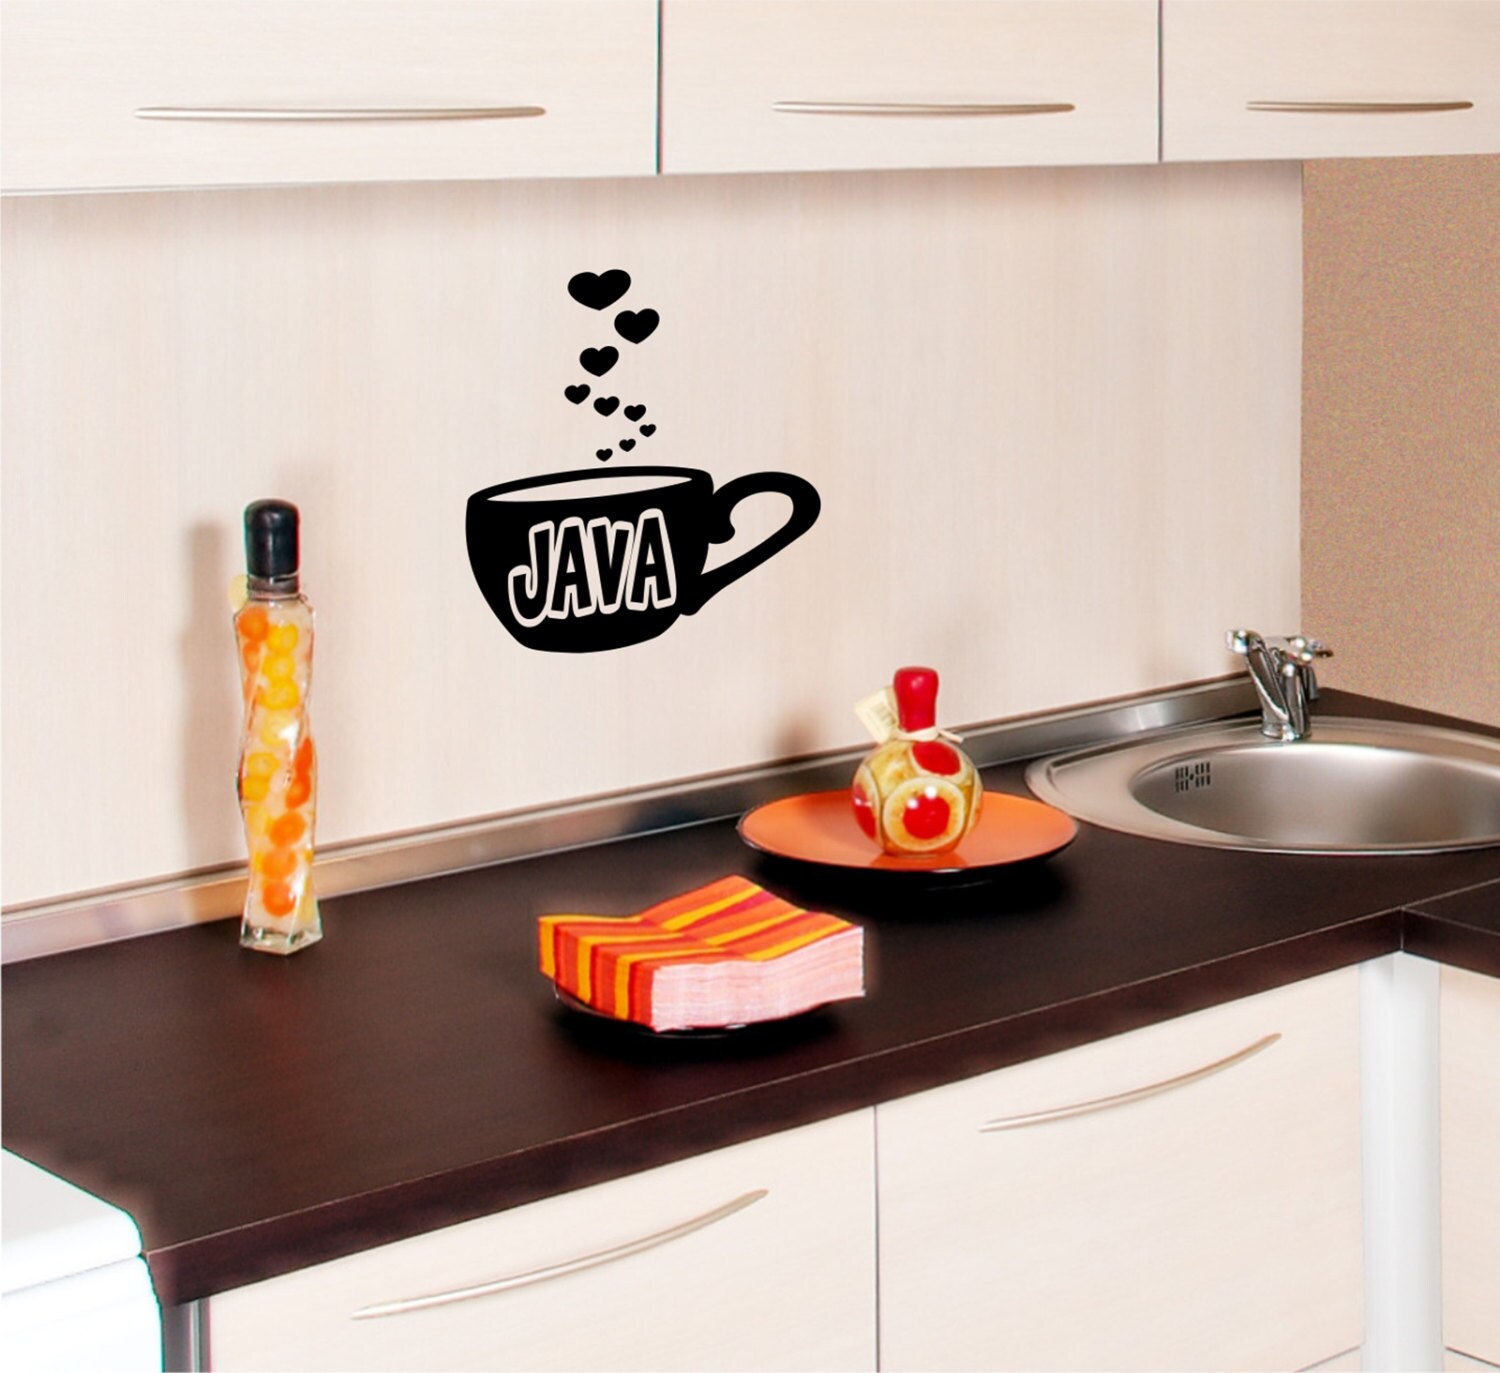 Love of Coffee Wall Decal cup mug sticker kitchen decor java heart quote mural